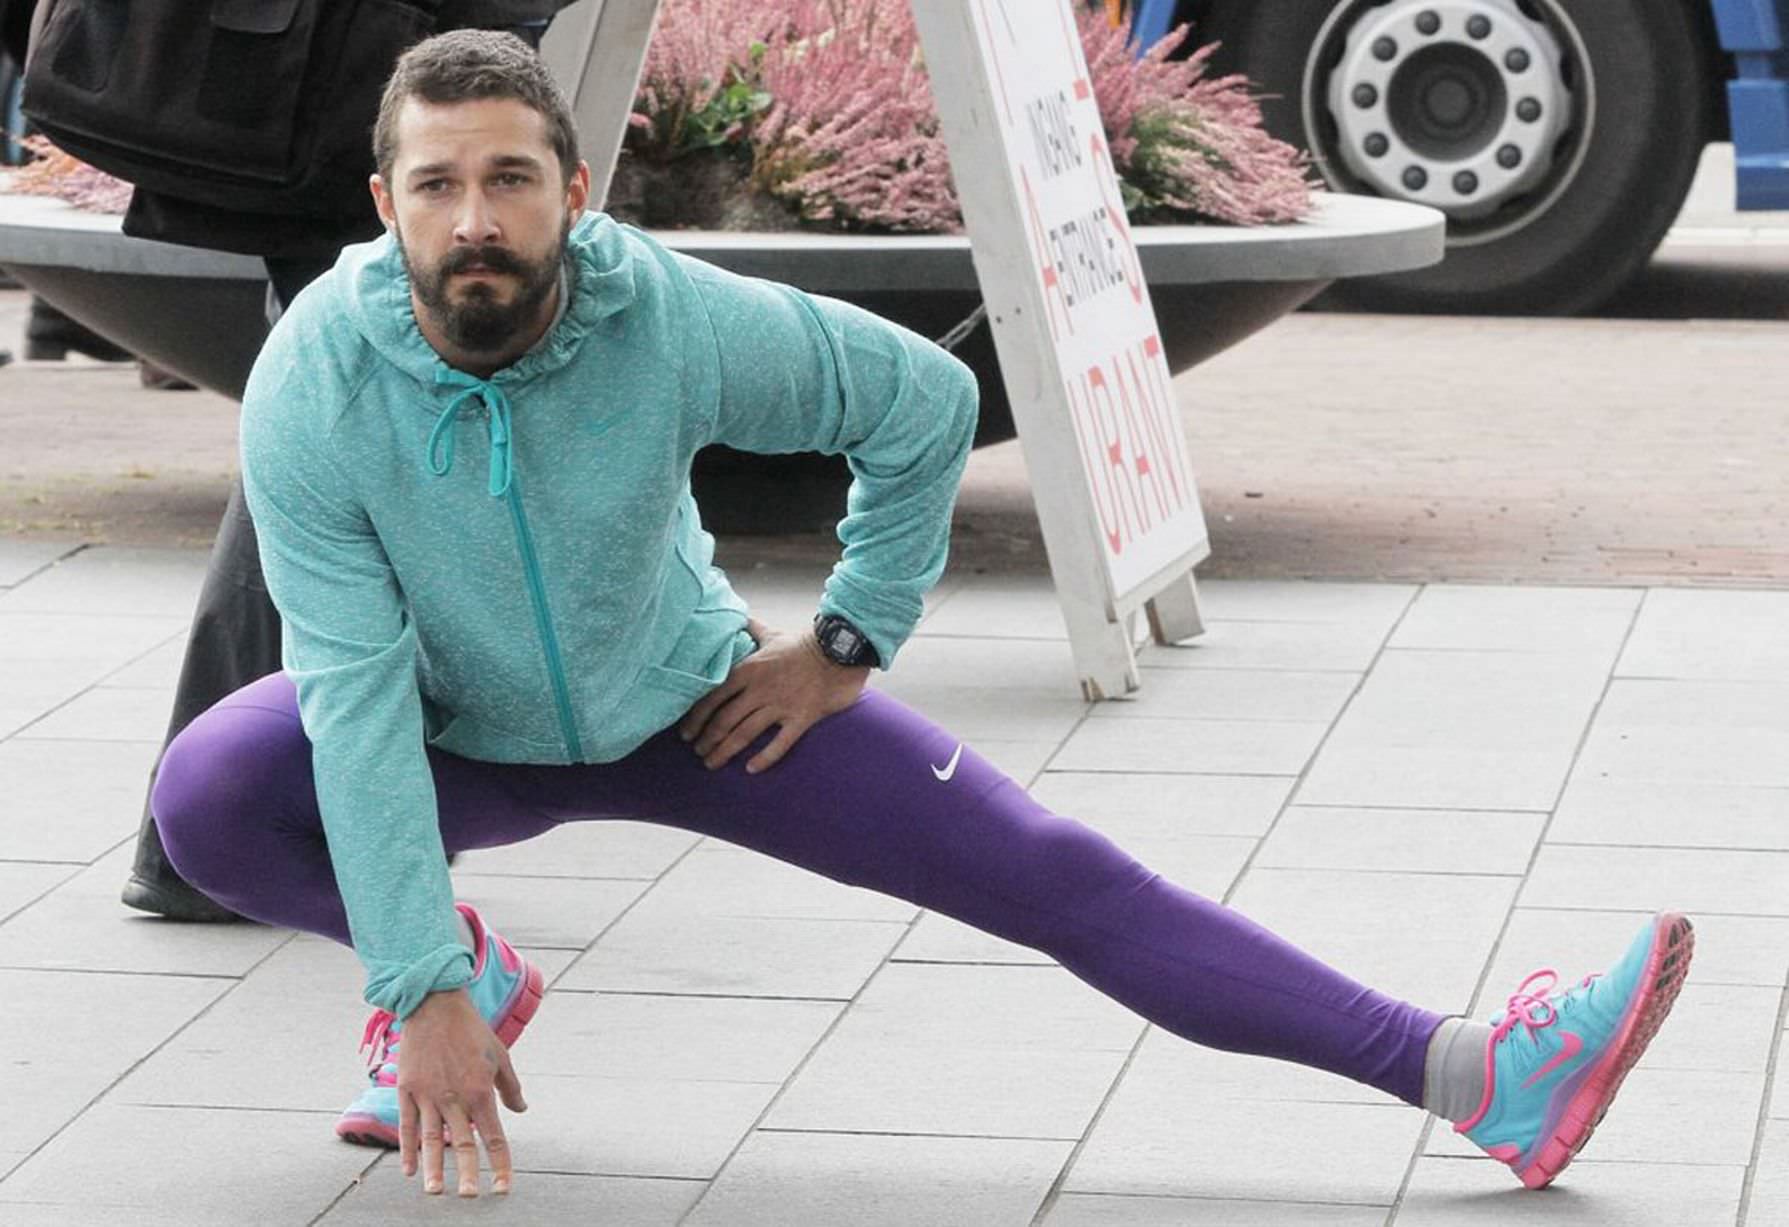 This Photo Of Shia La Beouf Stretching Has Taken Over The Internet For An Hilarious Reason